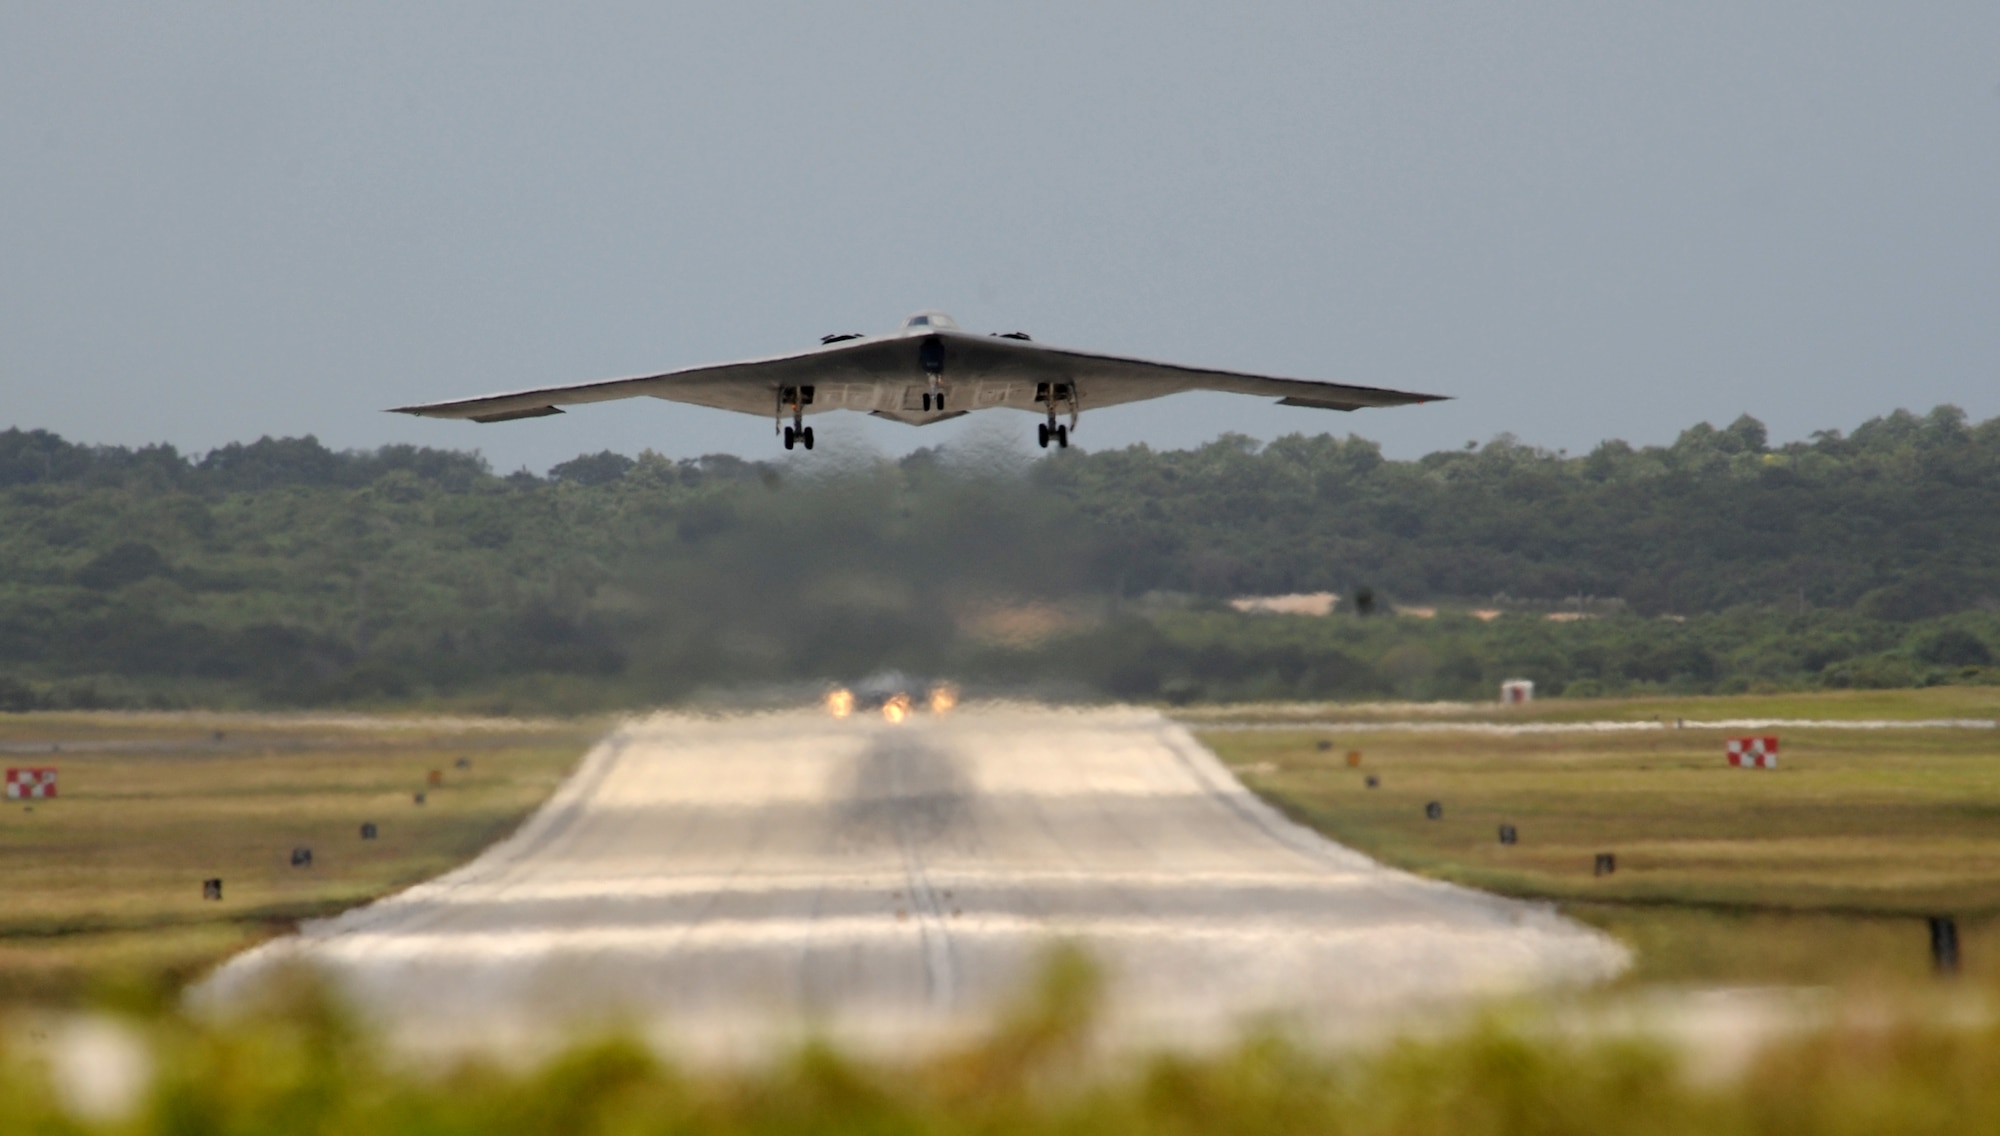 A B-2 Spirit from the 509th Bomb Wing, 13th Bomb Squadron Whiteman
Air Force Base, Mo., gets airborne while another B-2 waits for clearance at Andersen Air Force Base, Guam March 4. More than 270 Airmen and four B-2 Spirits are deployed to Andersen supporting the Pacific Regions Continuous Bomber Presence. 

(U.S. Air Force photo/ Master Sgt. Kevin J. Gruenwald) released





















  












 











































  












 

























